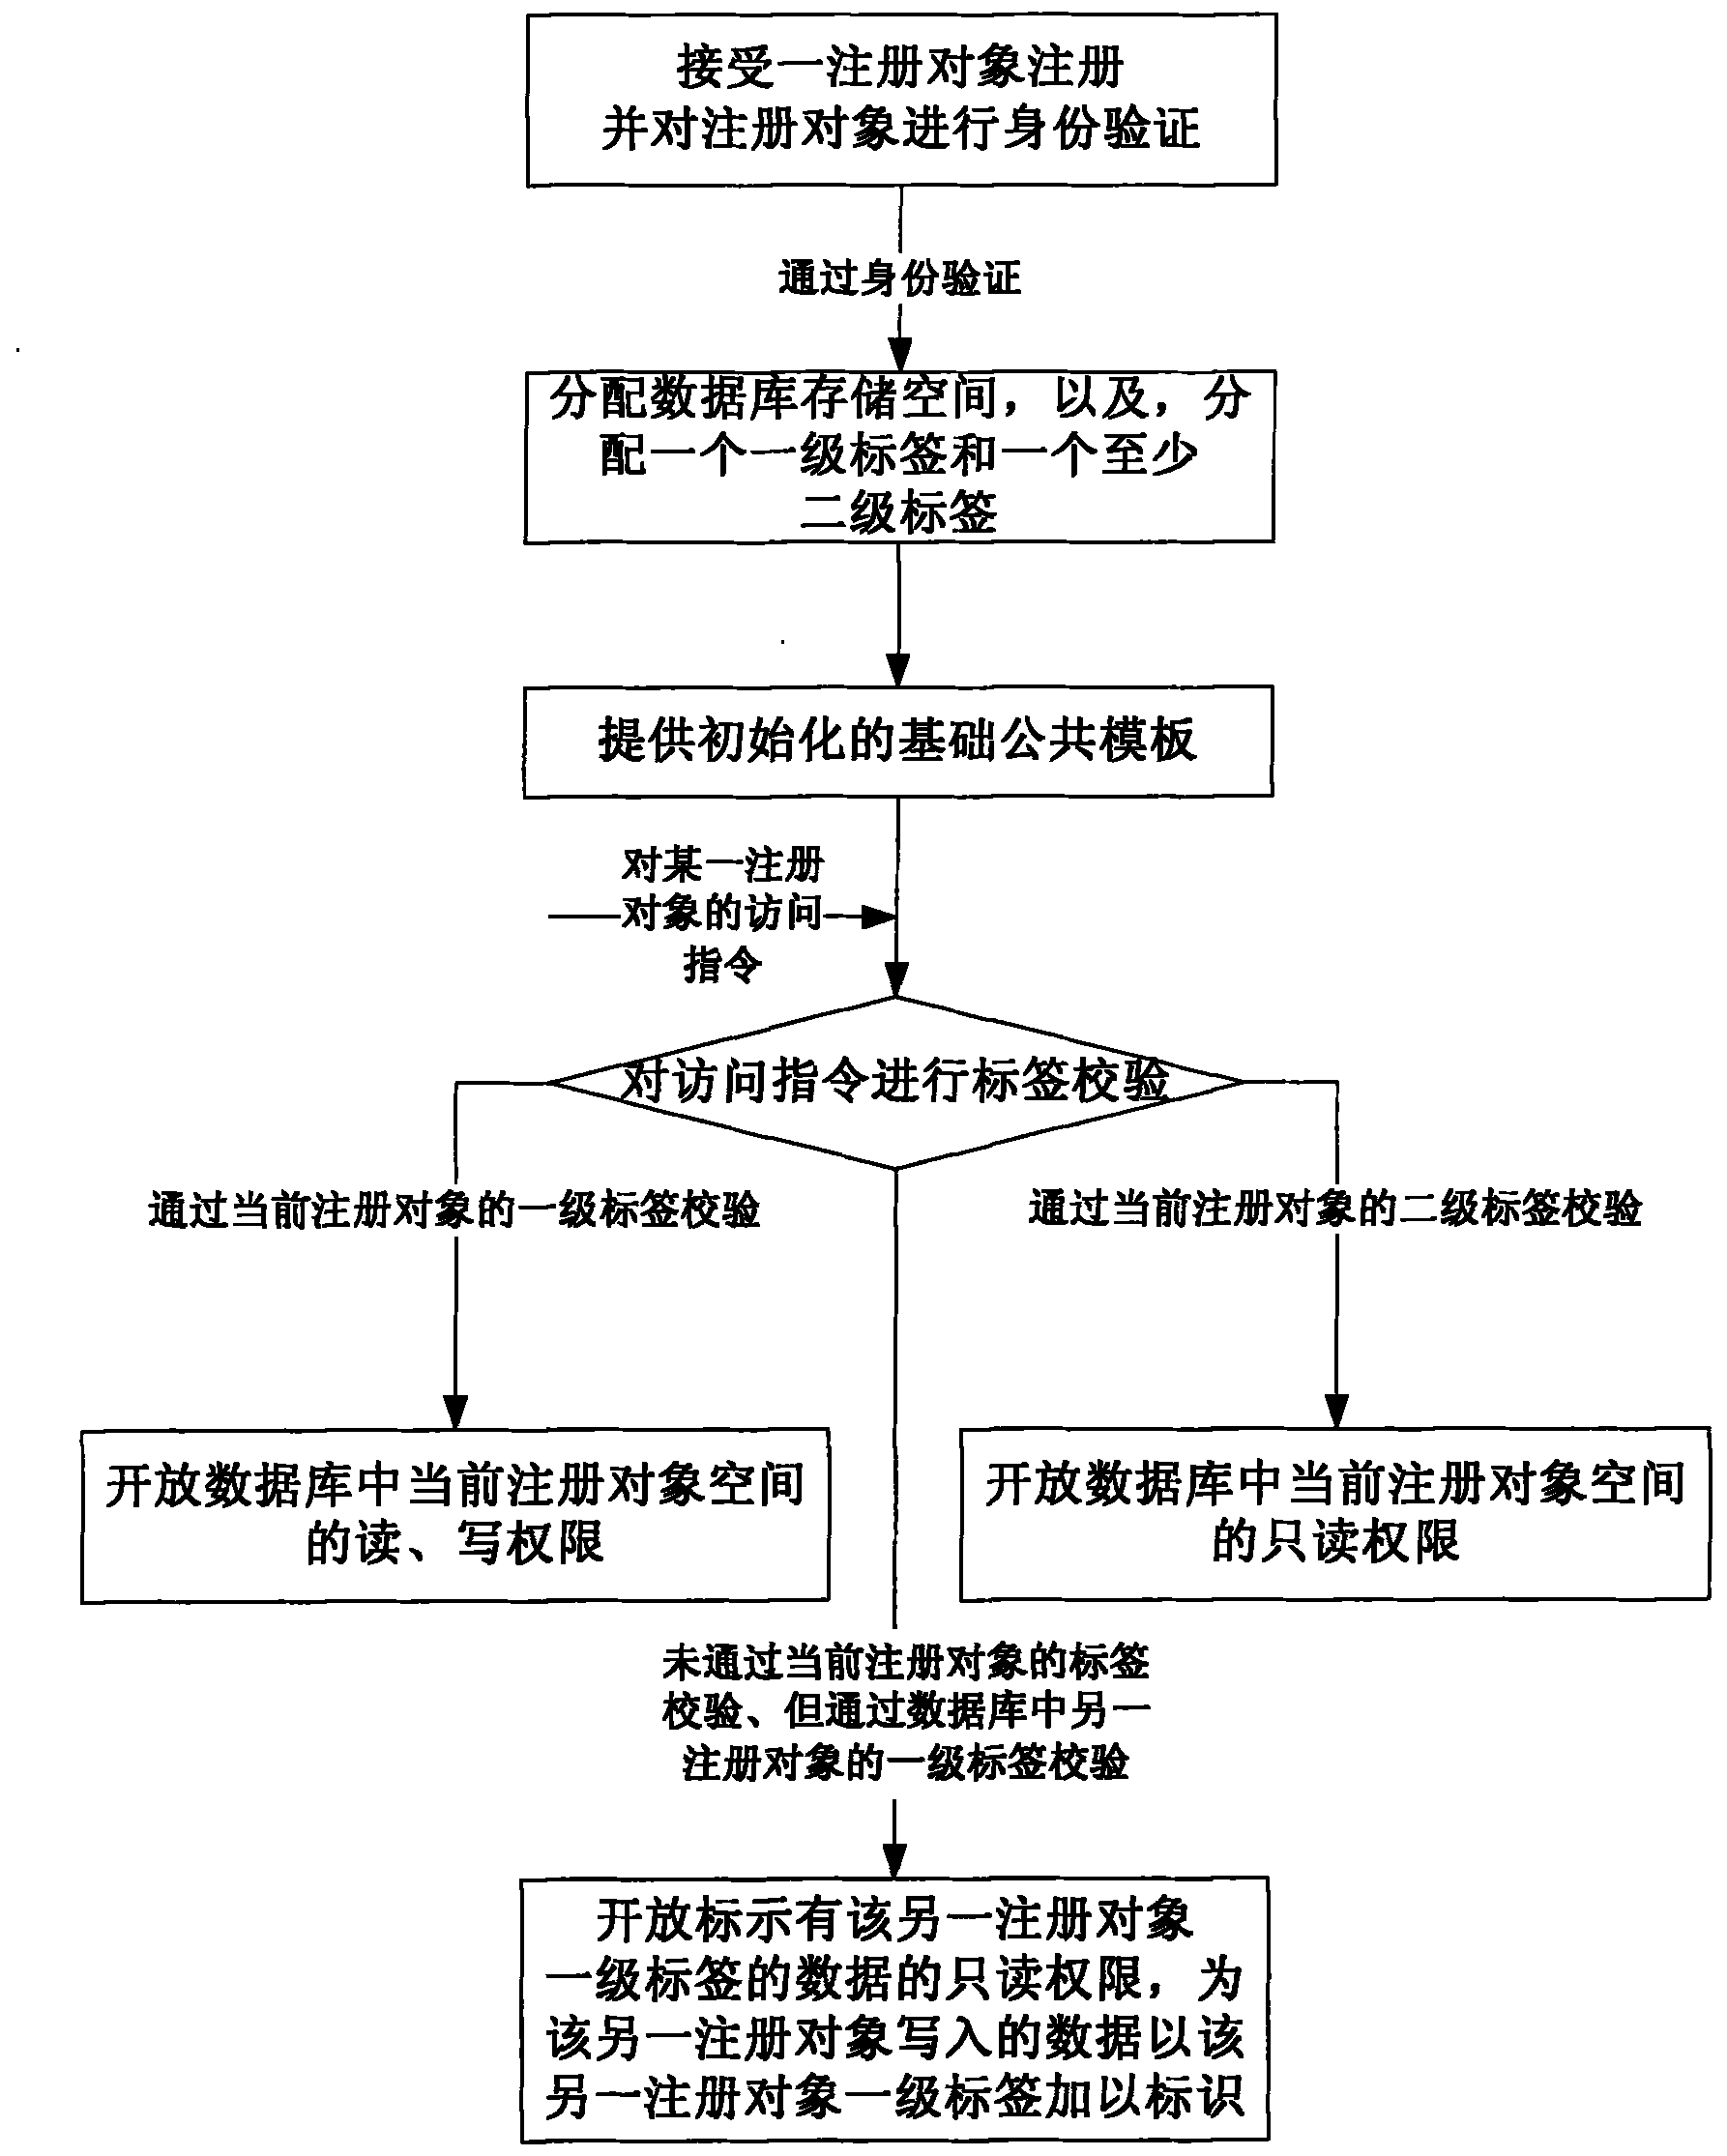 Information database system and access control method thereof